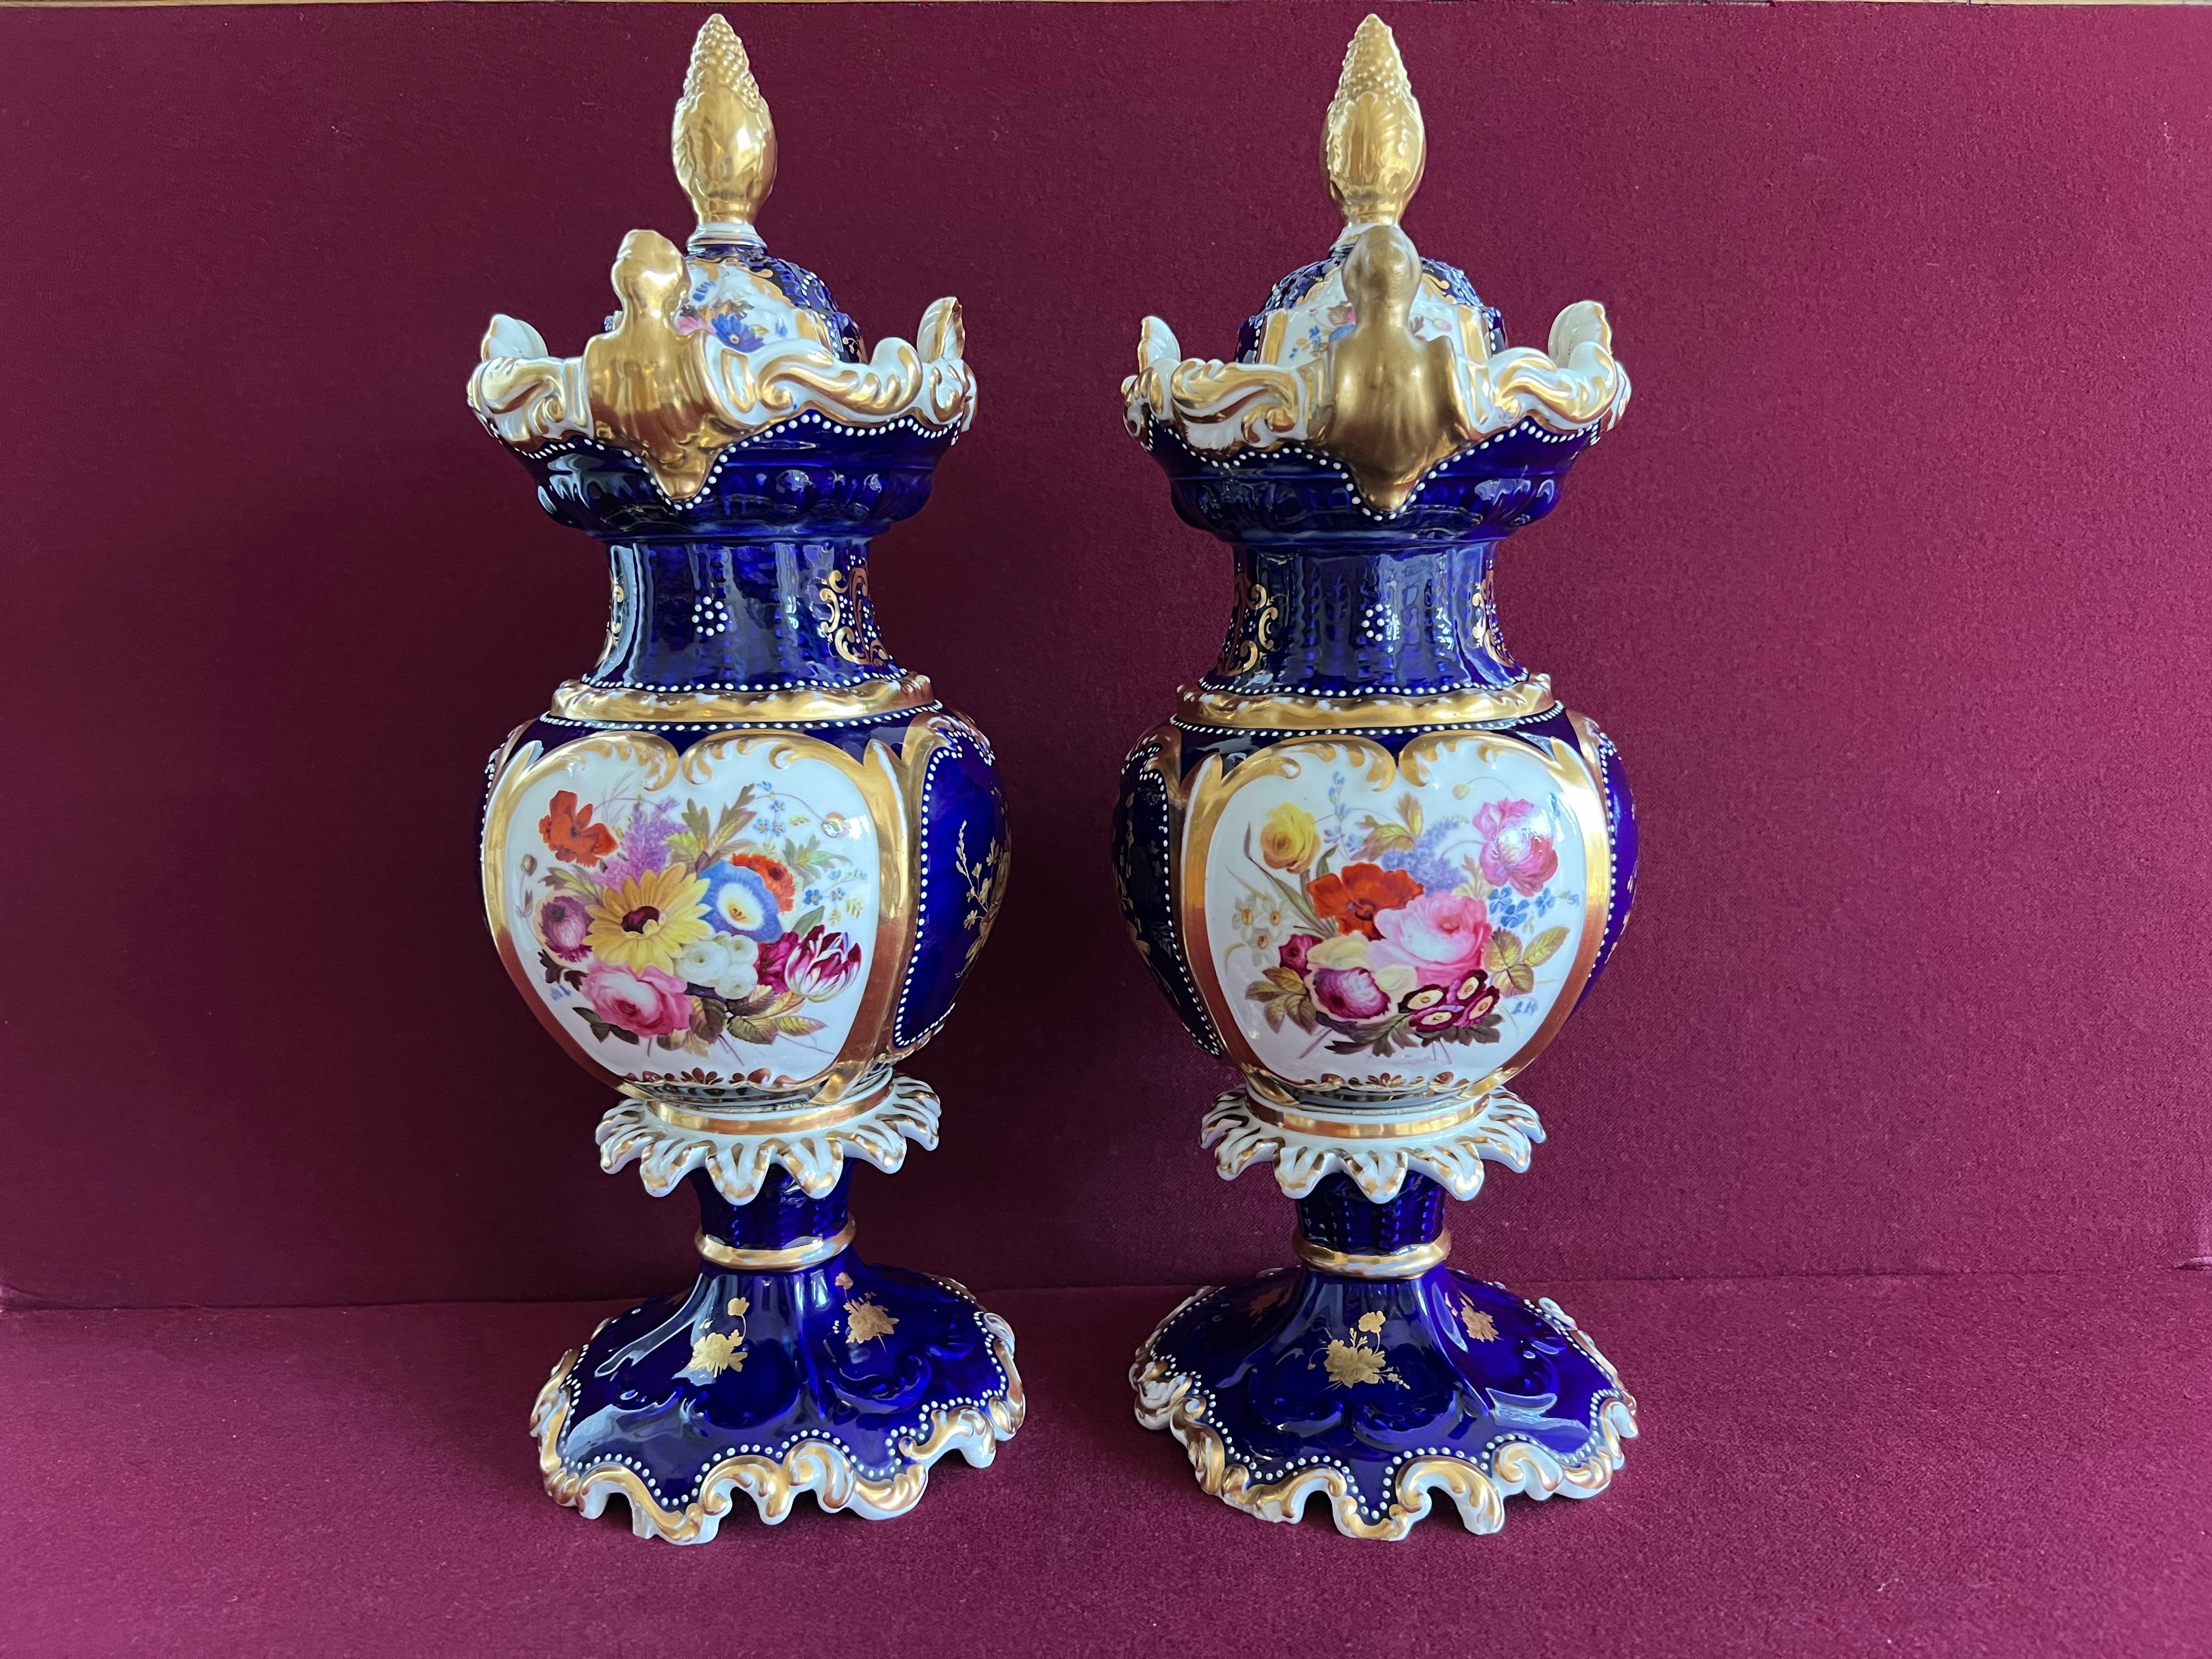 A tall pair of Chamberlain Worcester porcelain vases and covers, typical of the 1840's. Finely decorated with panels of summer flowers, chased gilding and 'fancy birds' in landscapes with an underglaze blue ground, richly gilded and decorated with